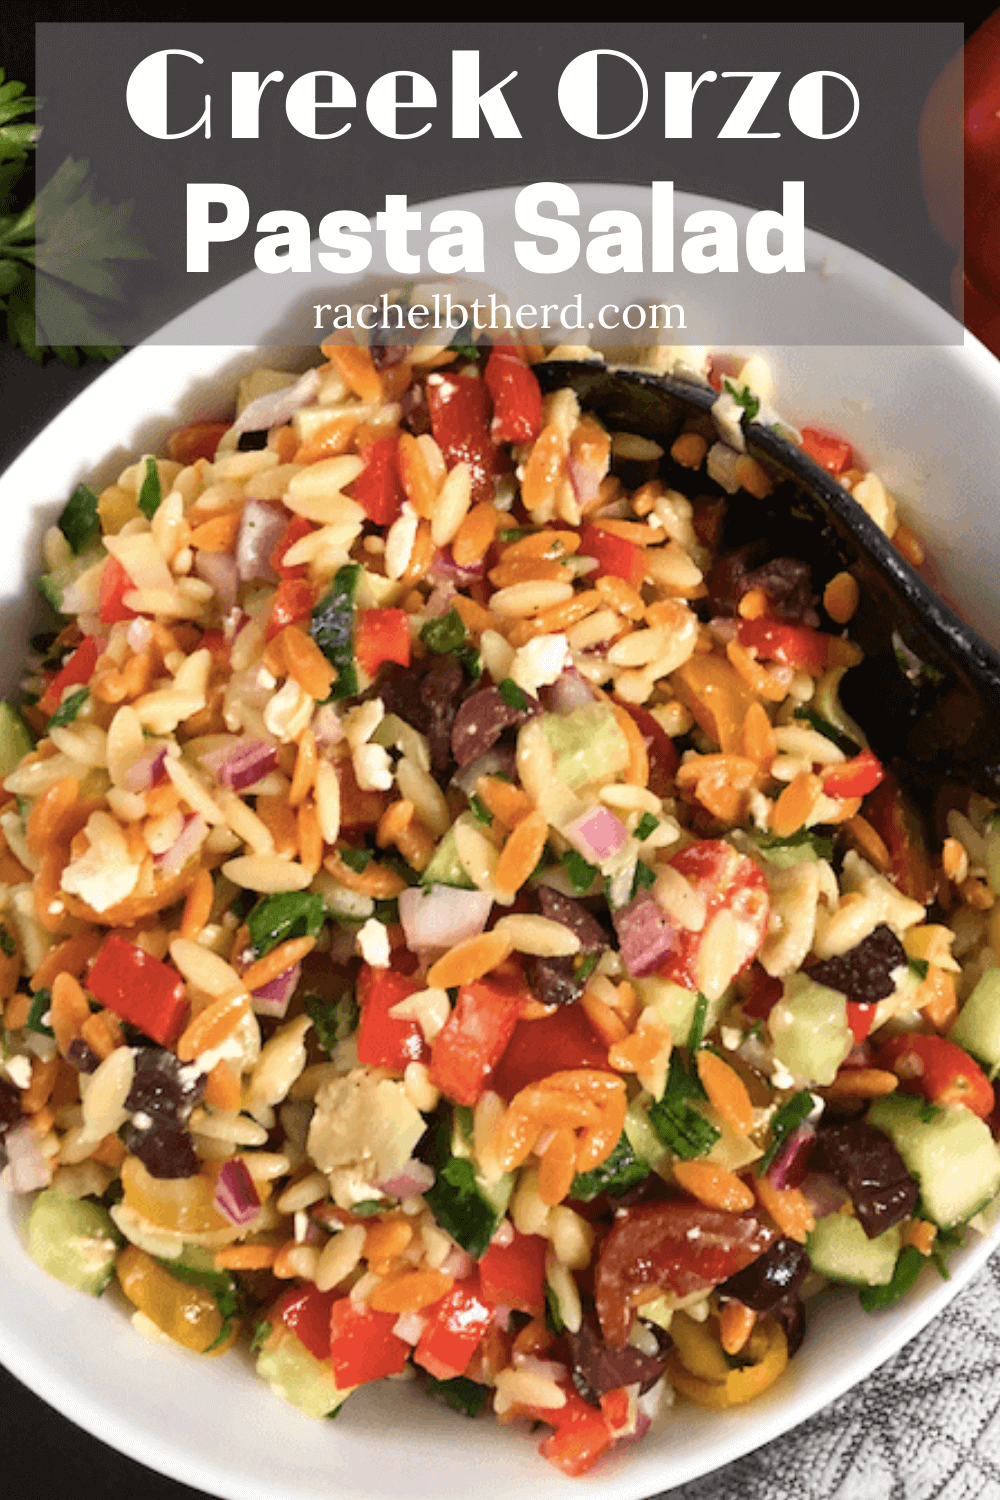 Greek Orzo Pasta Salad served in a bowl